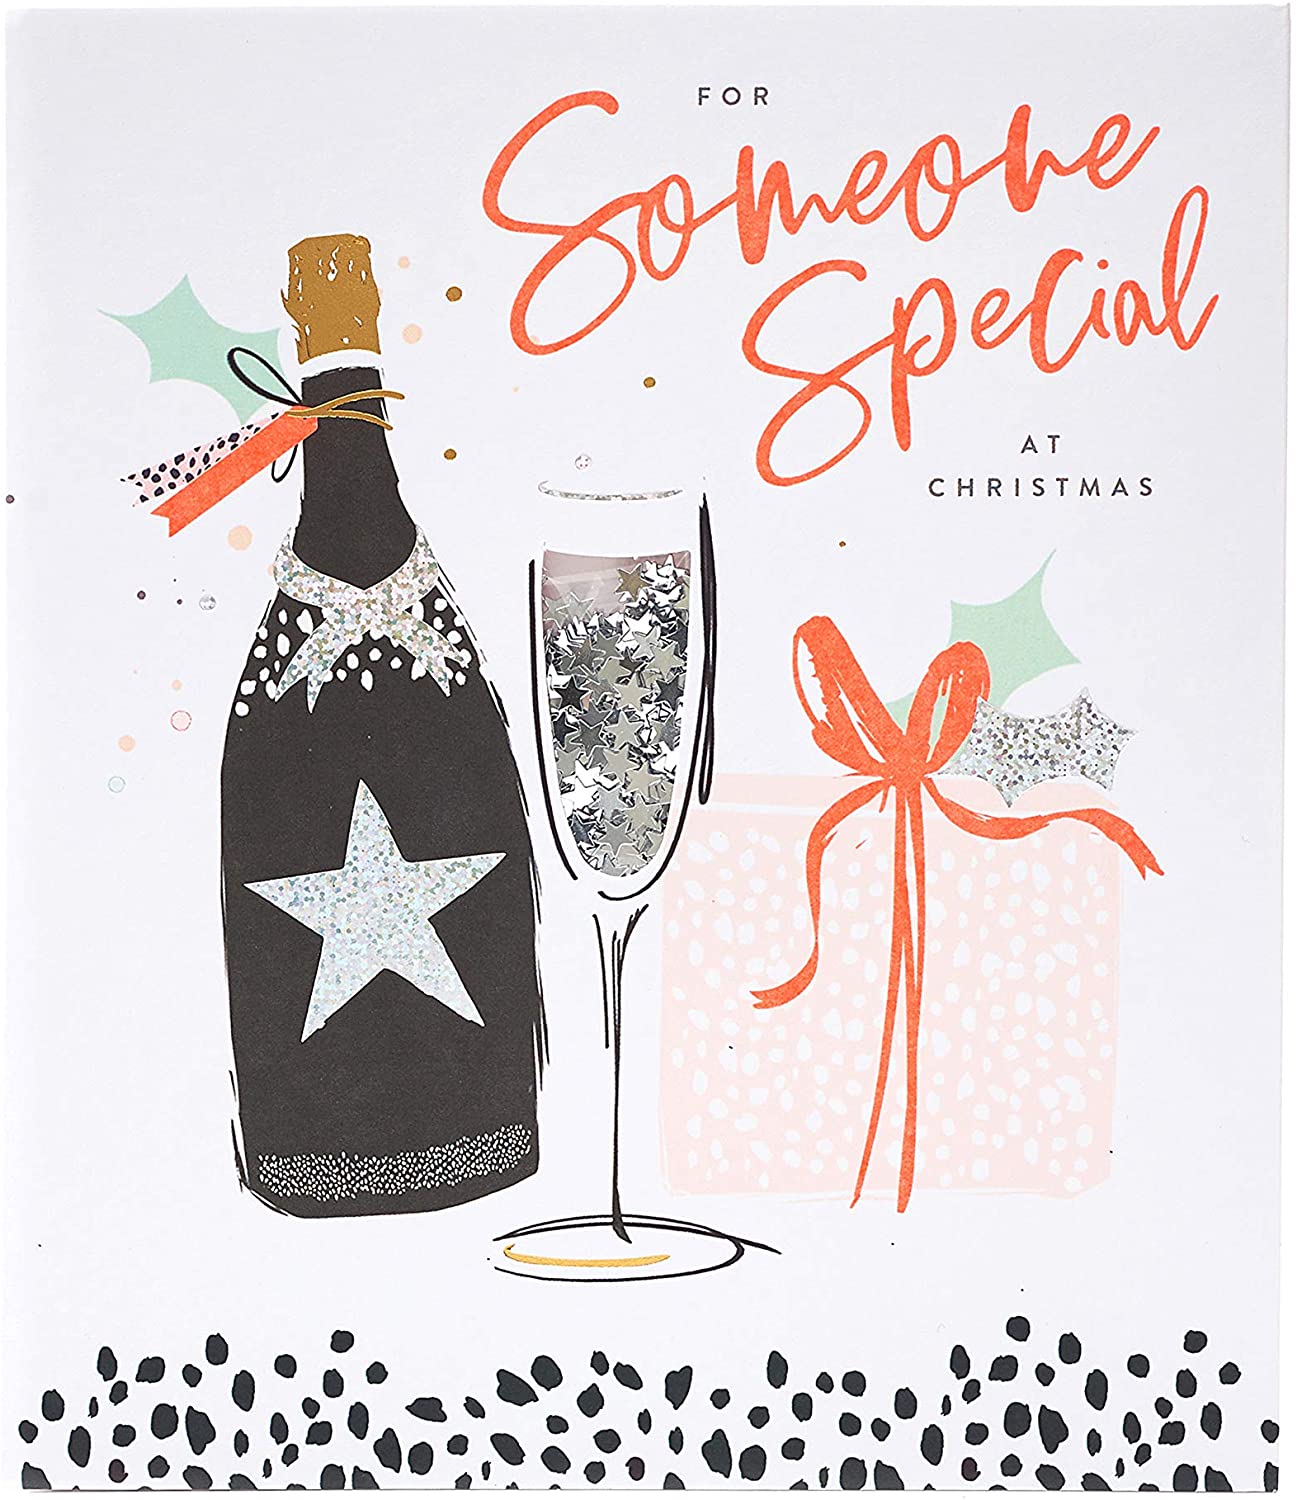 Someone Special Christmas Card Bold Neon and Sequin Design